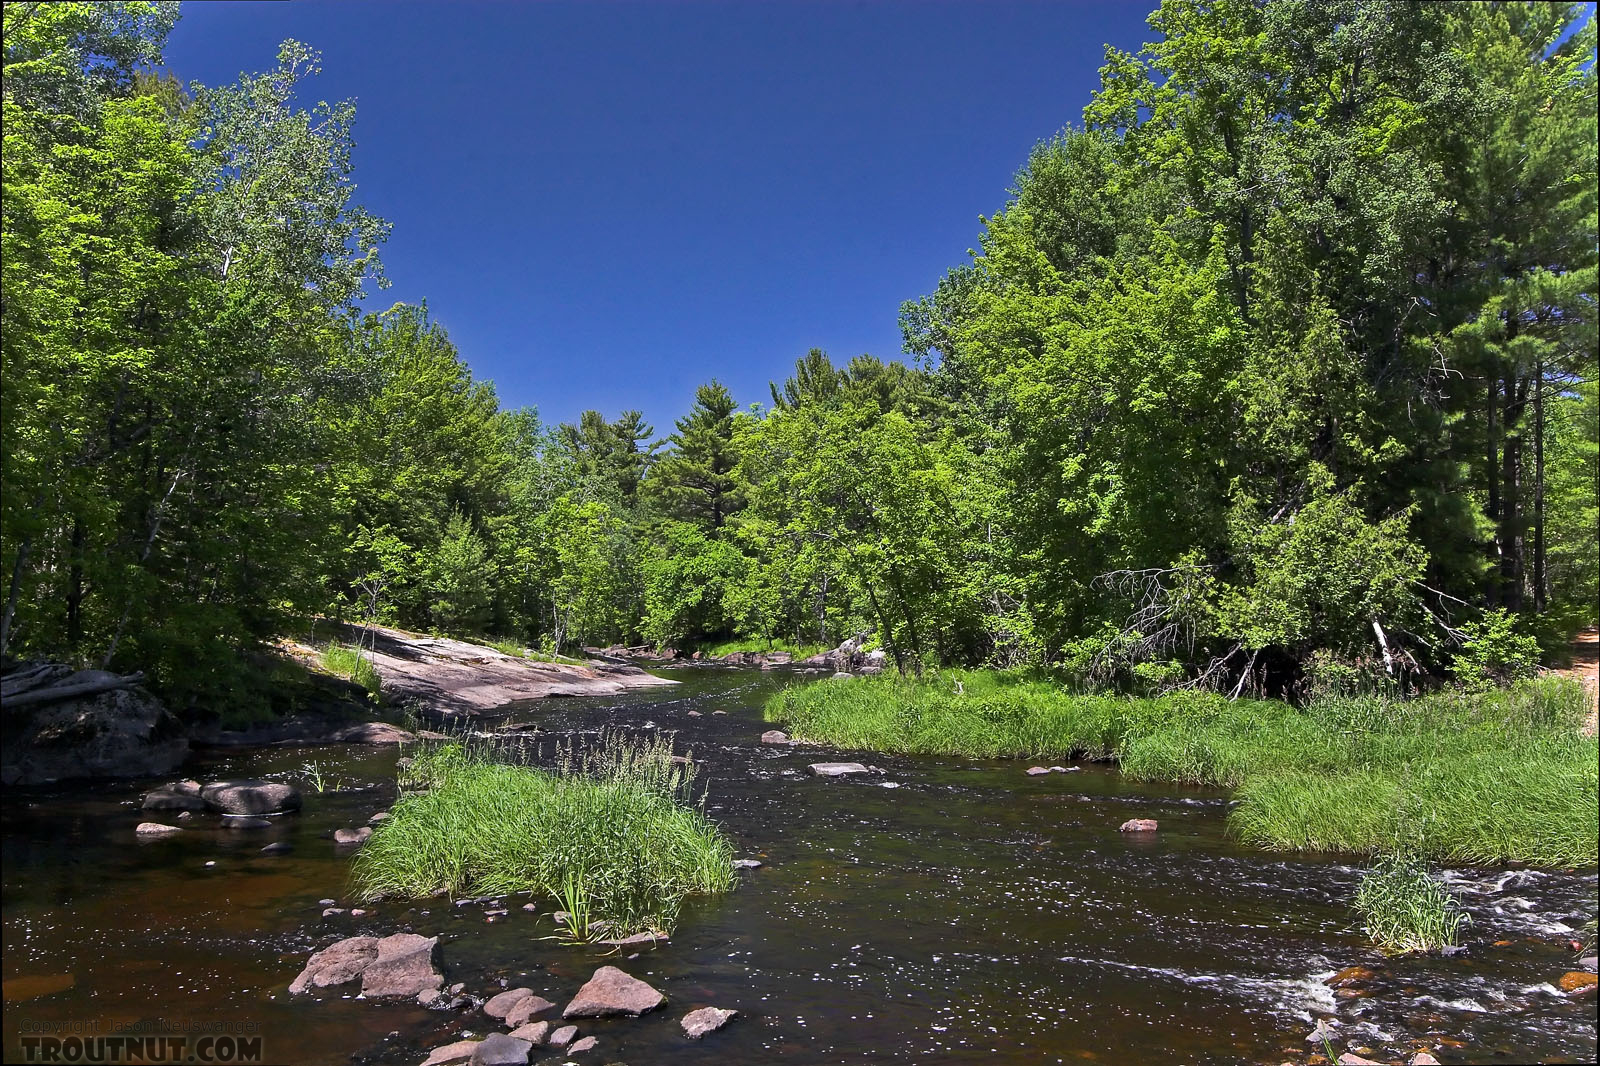 This pretty rapids is one of many channels of a large warmwater river. From the Chippewa River in Wisconsin.